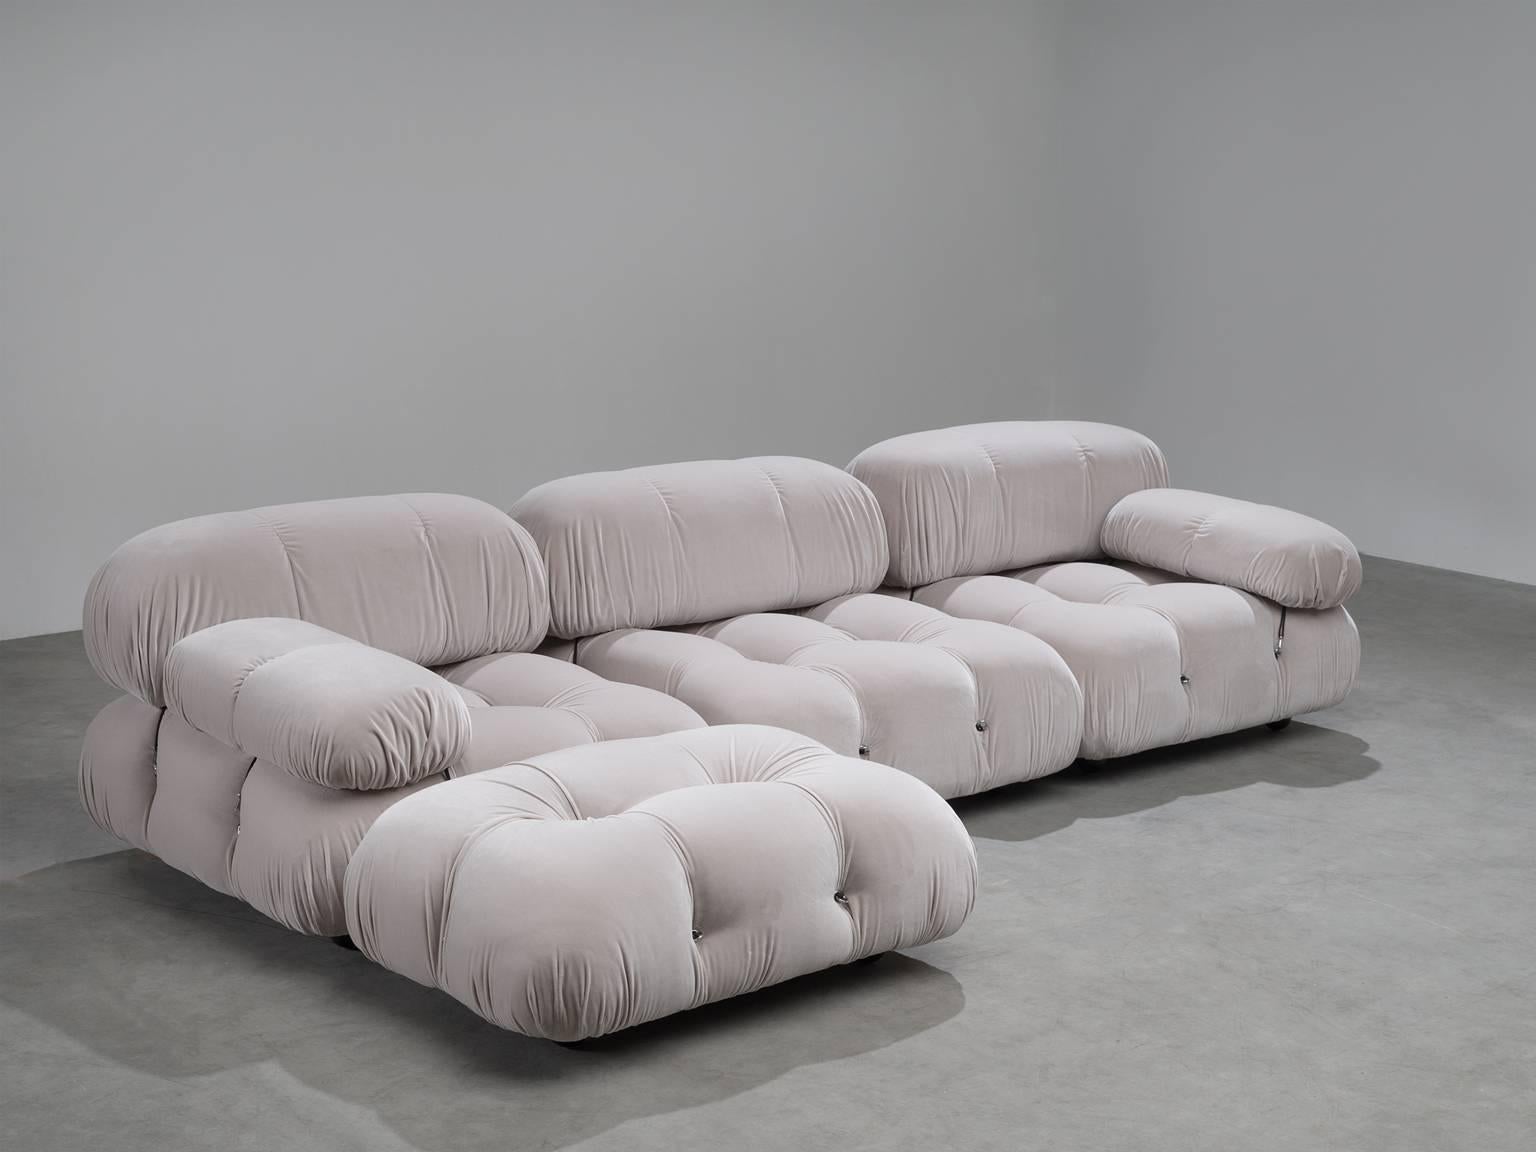 Four elements of the 'Camaleonda' sofa, in grey velvet Kvadrat Harald 3 upholstery by Mario Bellini for B&B Italia, Italy, 1972.

These four sectional elements of this sofa can be used freely and apart from one another. The backs and armrests